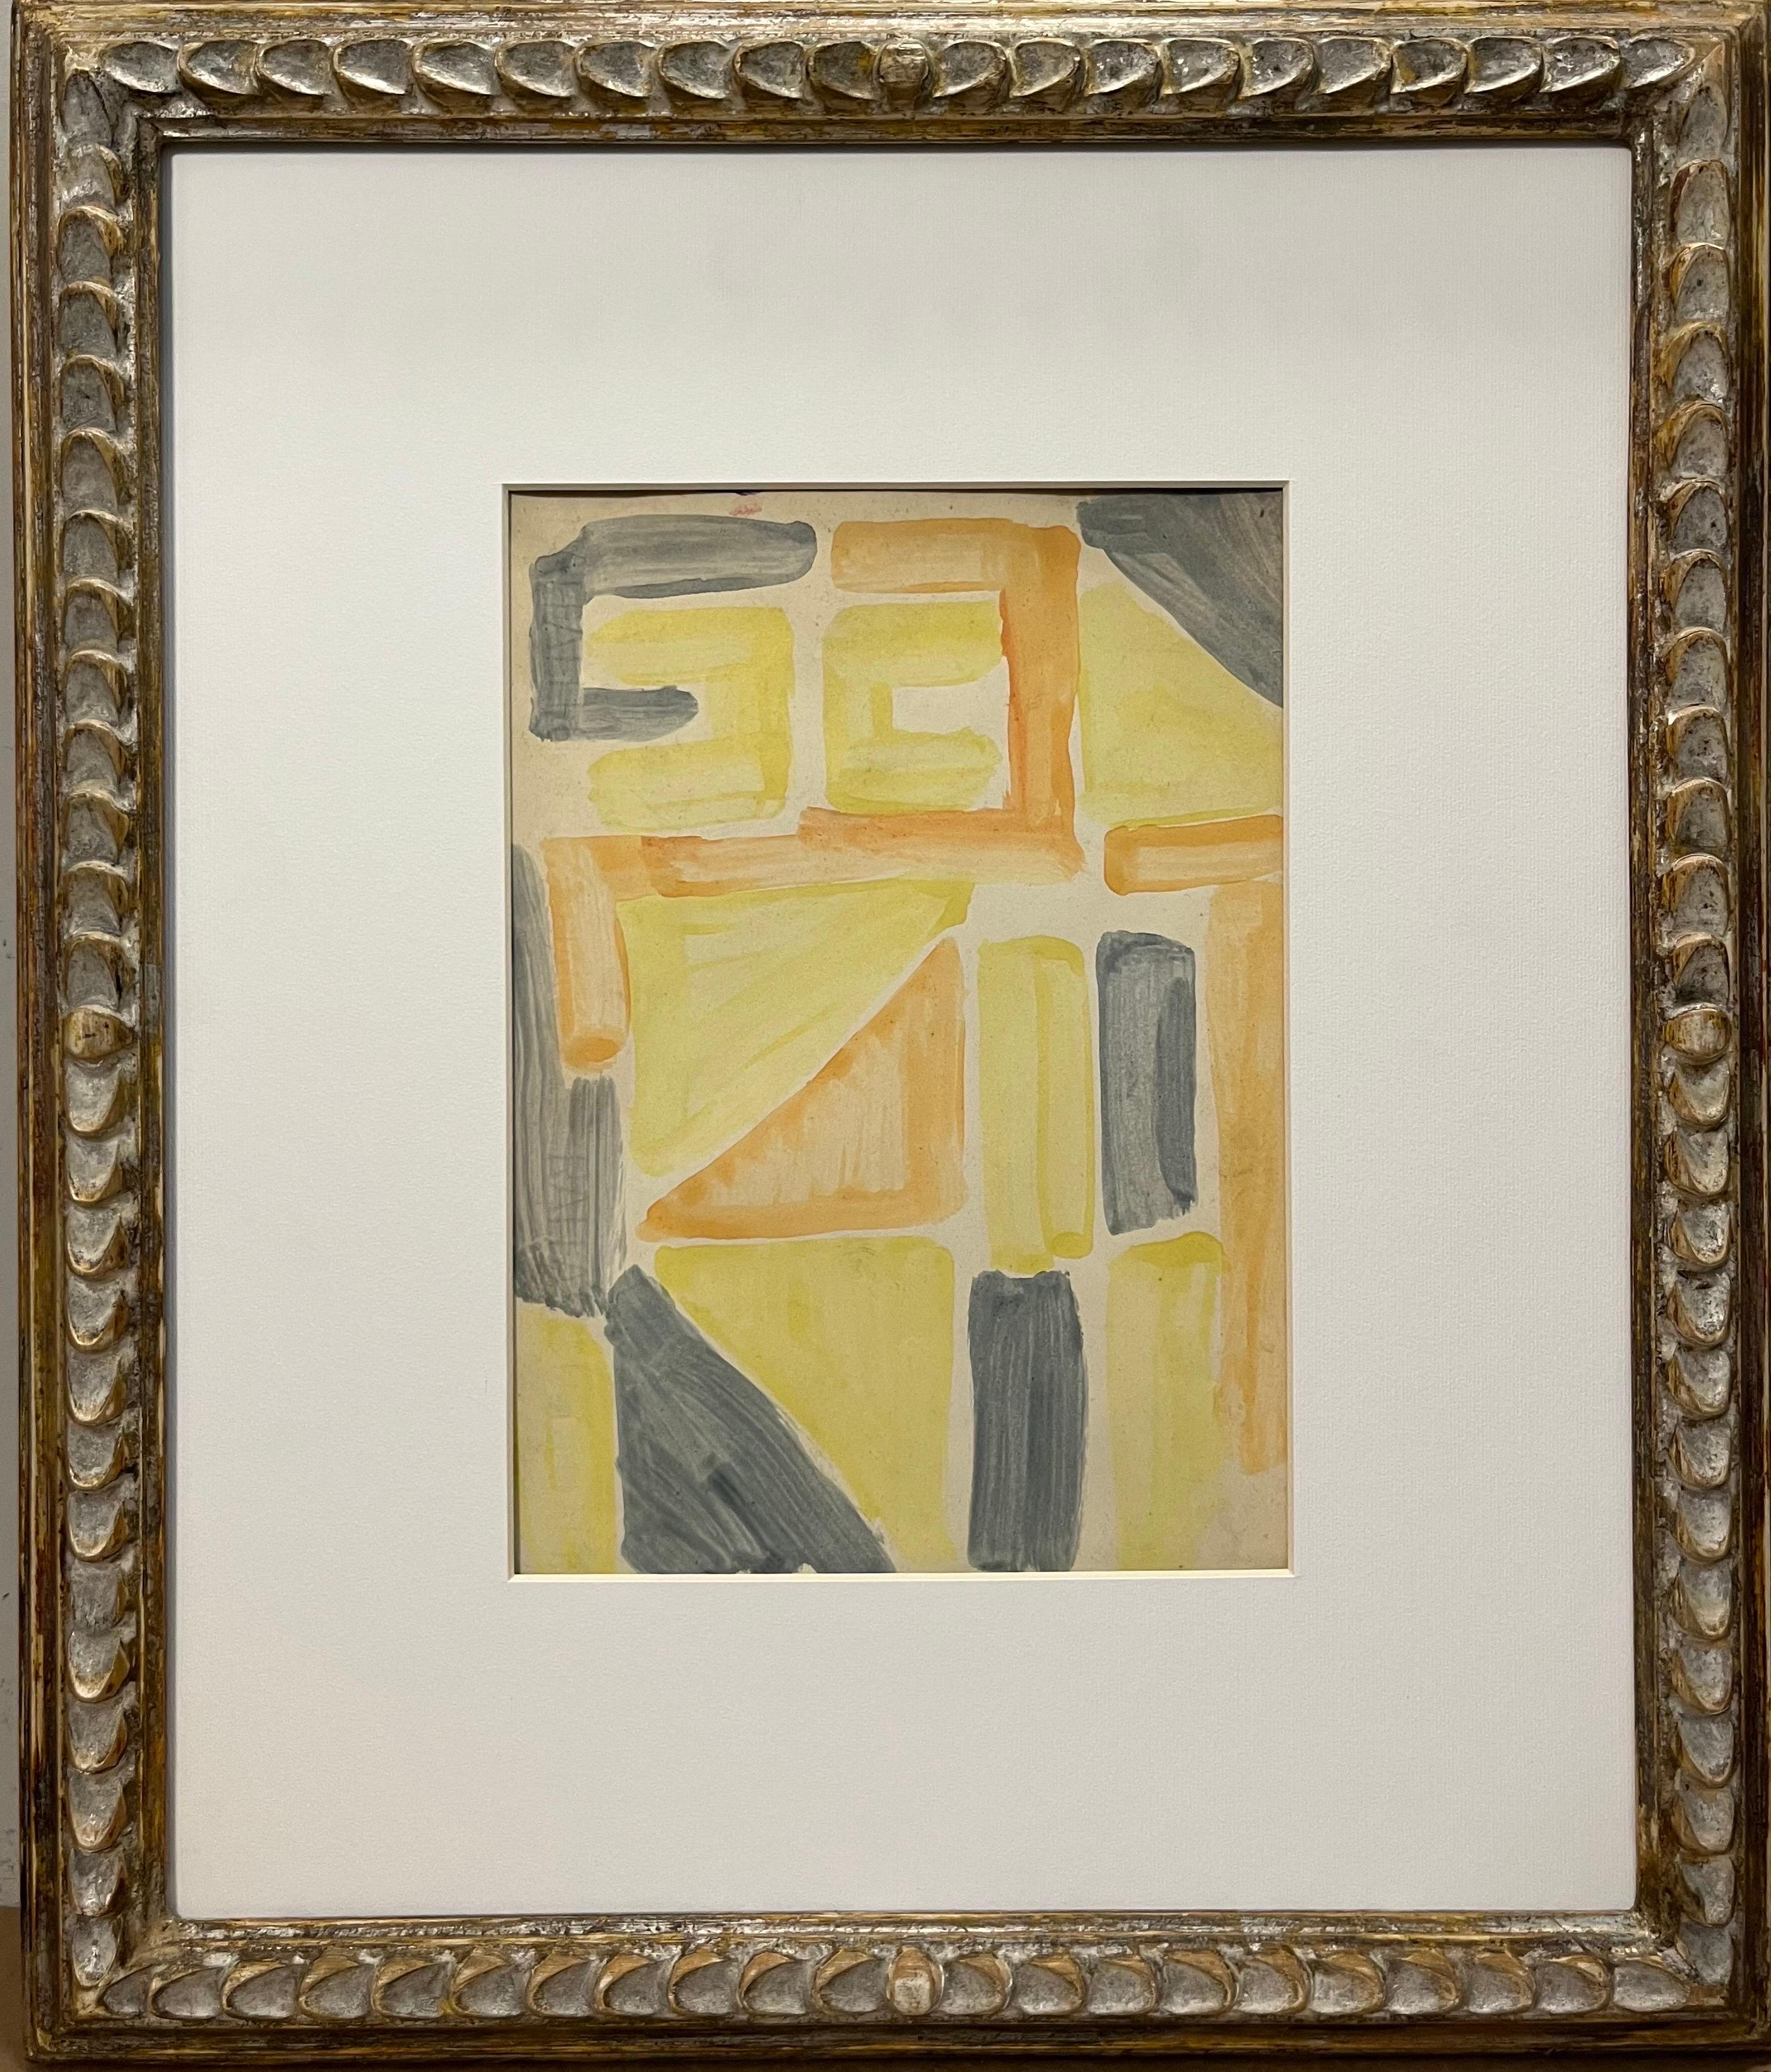 "Chromatic research and movement"abstract, yellow , orange, cm. 24 x 33 1954